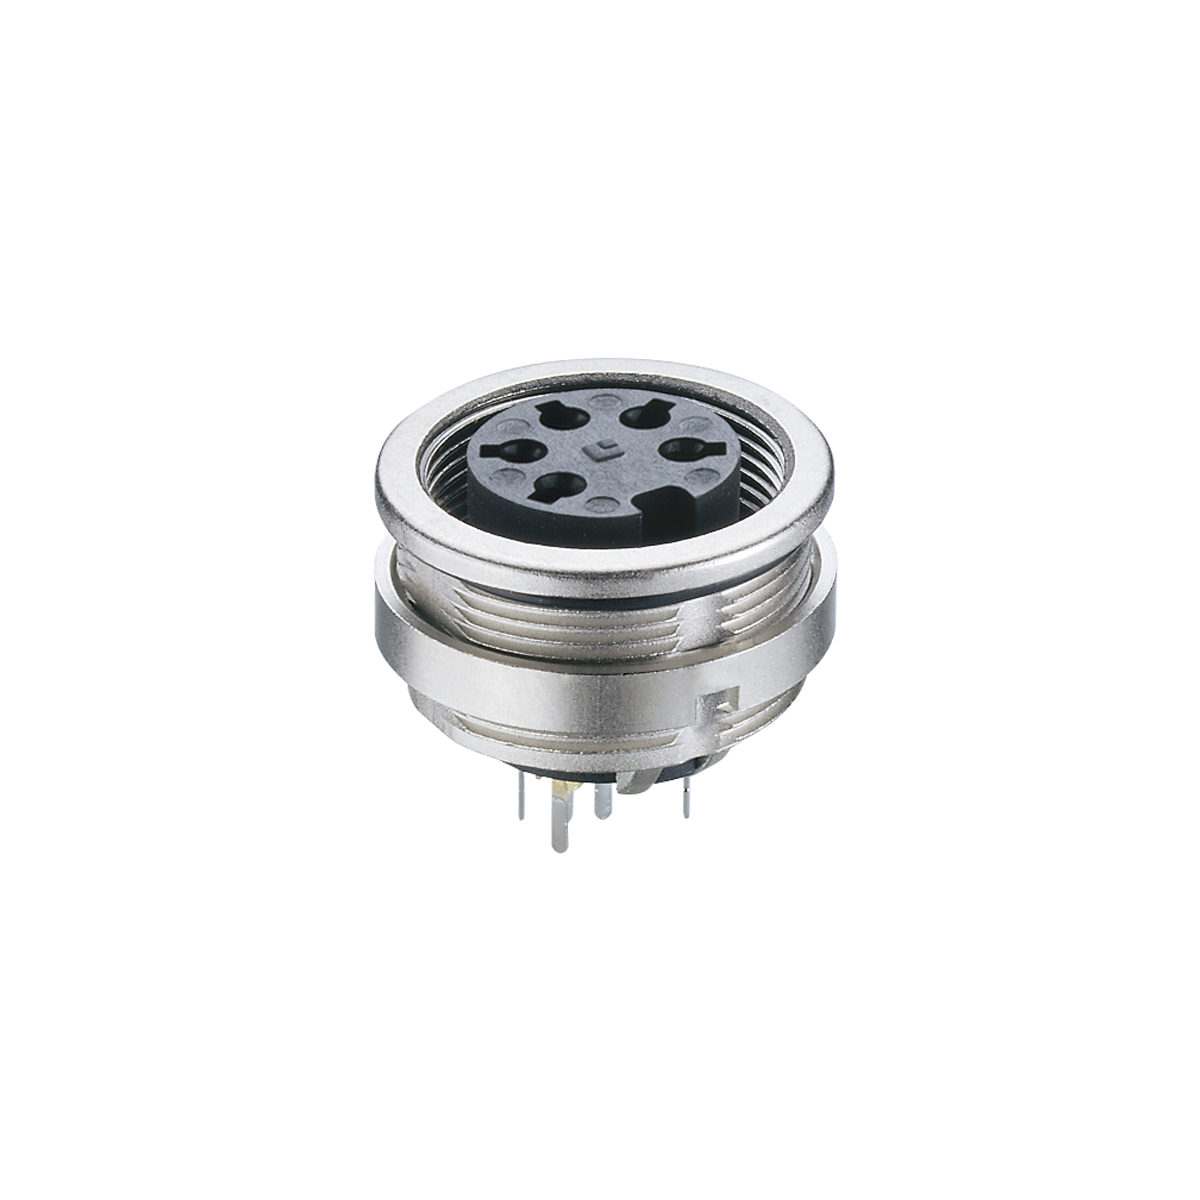 Lumberg: 306 (Series 03 | Circular connectors with threaded joint M16 acc. to IEC 61076-2-106, IP40/IP68)